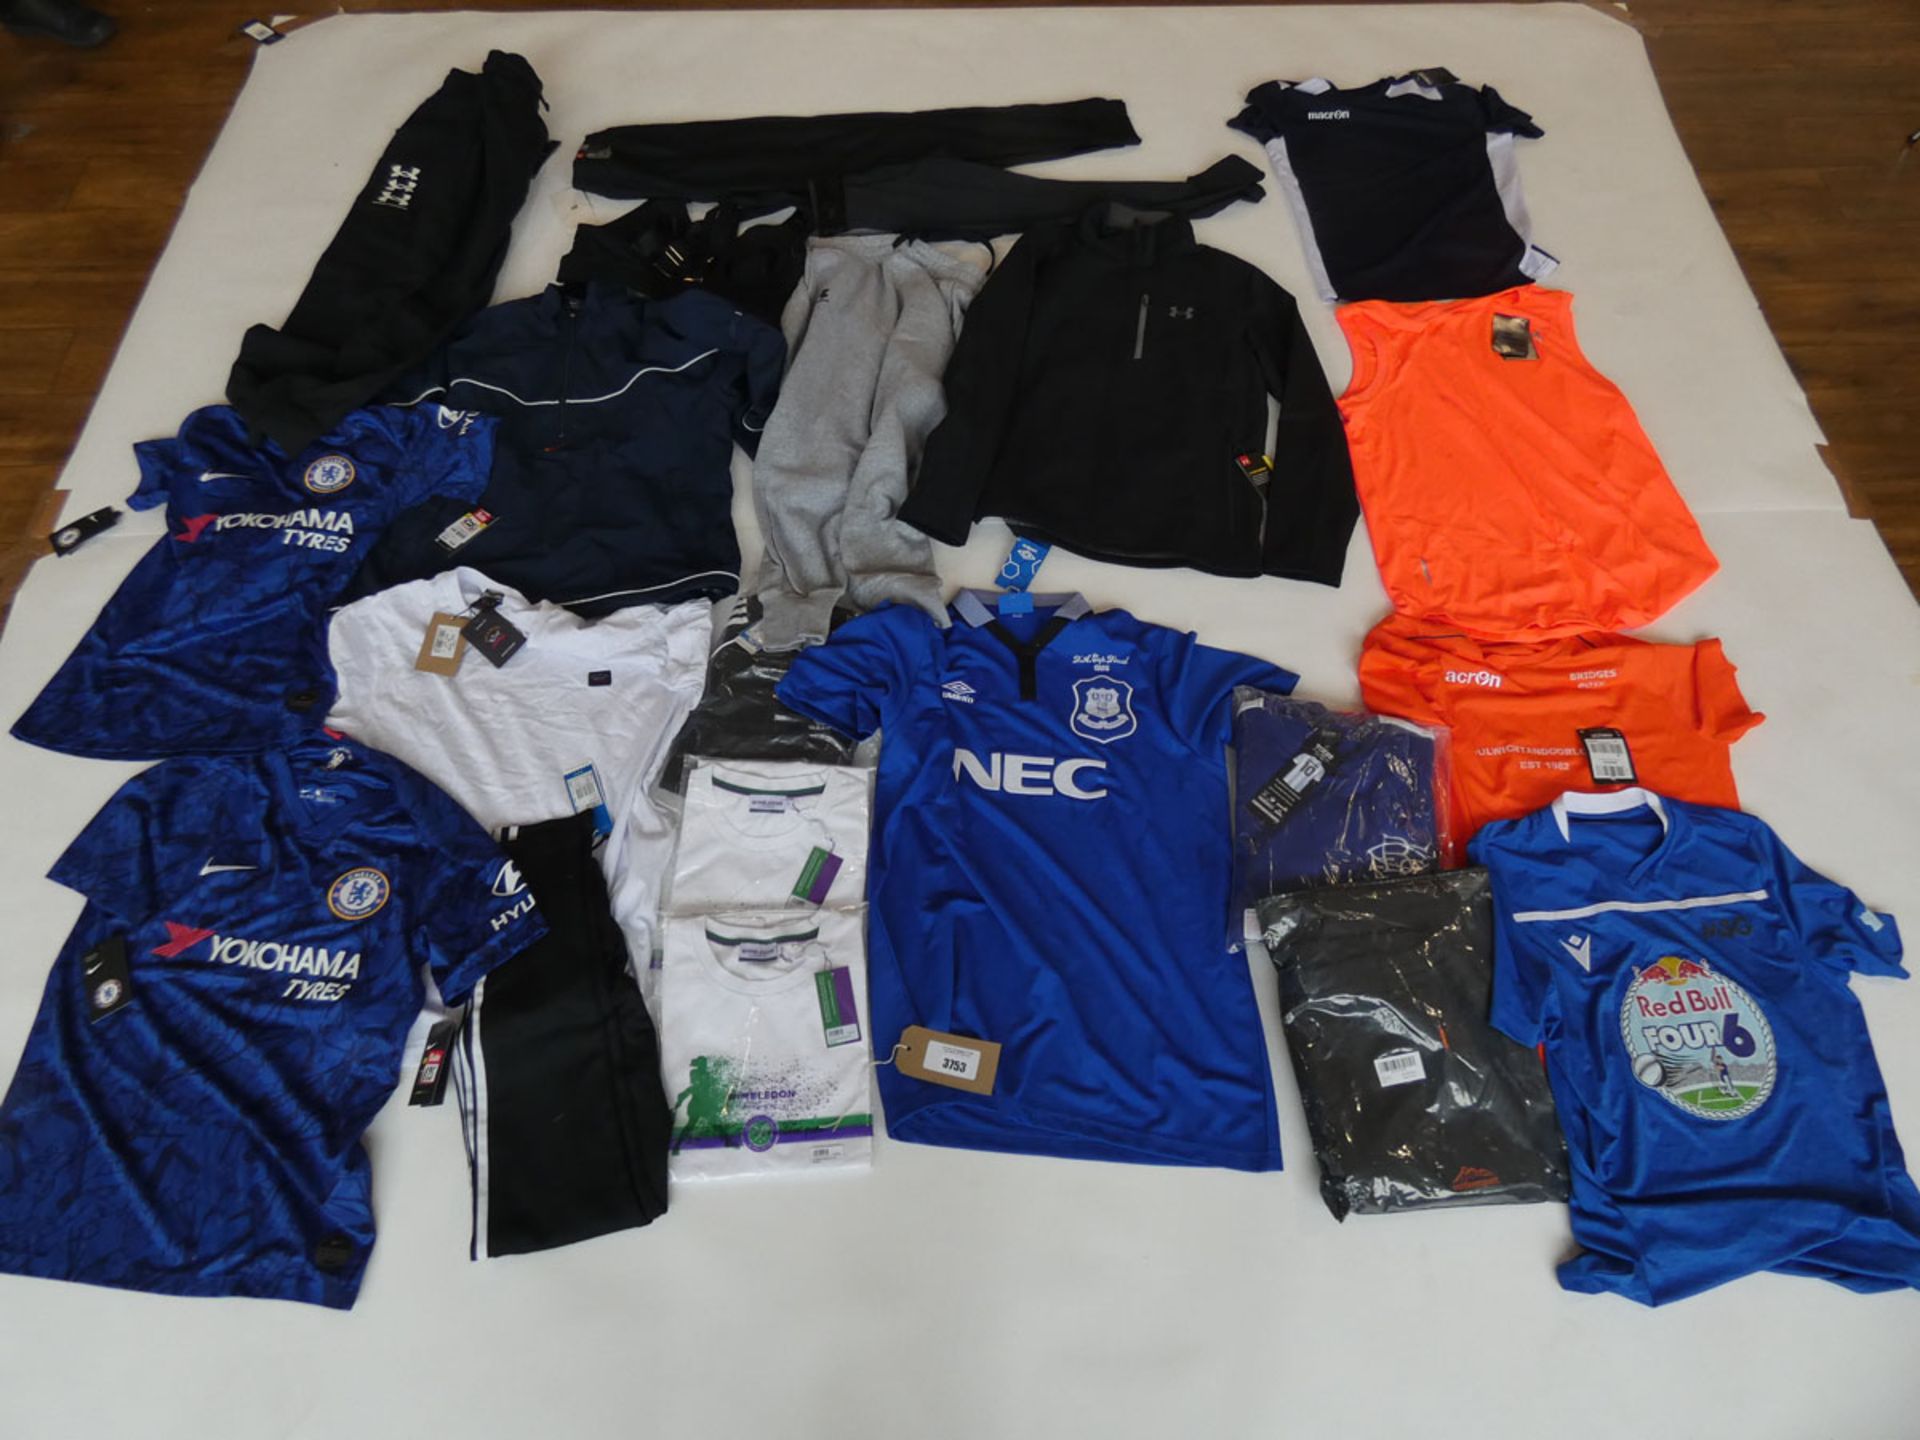 Large selection of sportswear to include Umbro, Nike, Under Armour, etc in various sizes